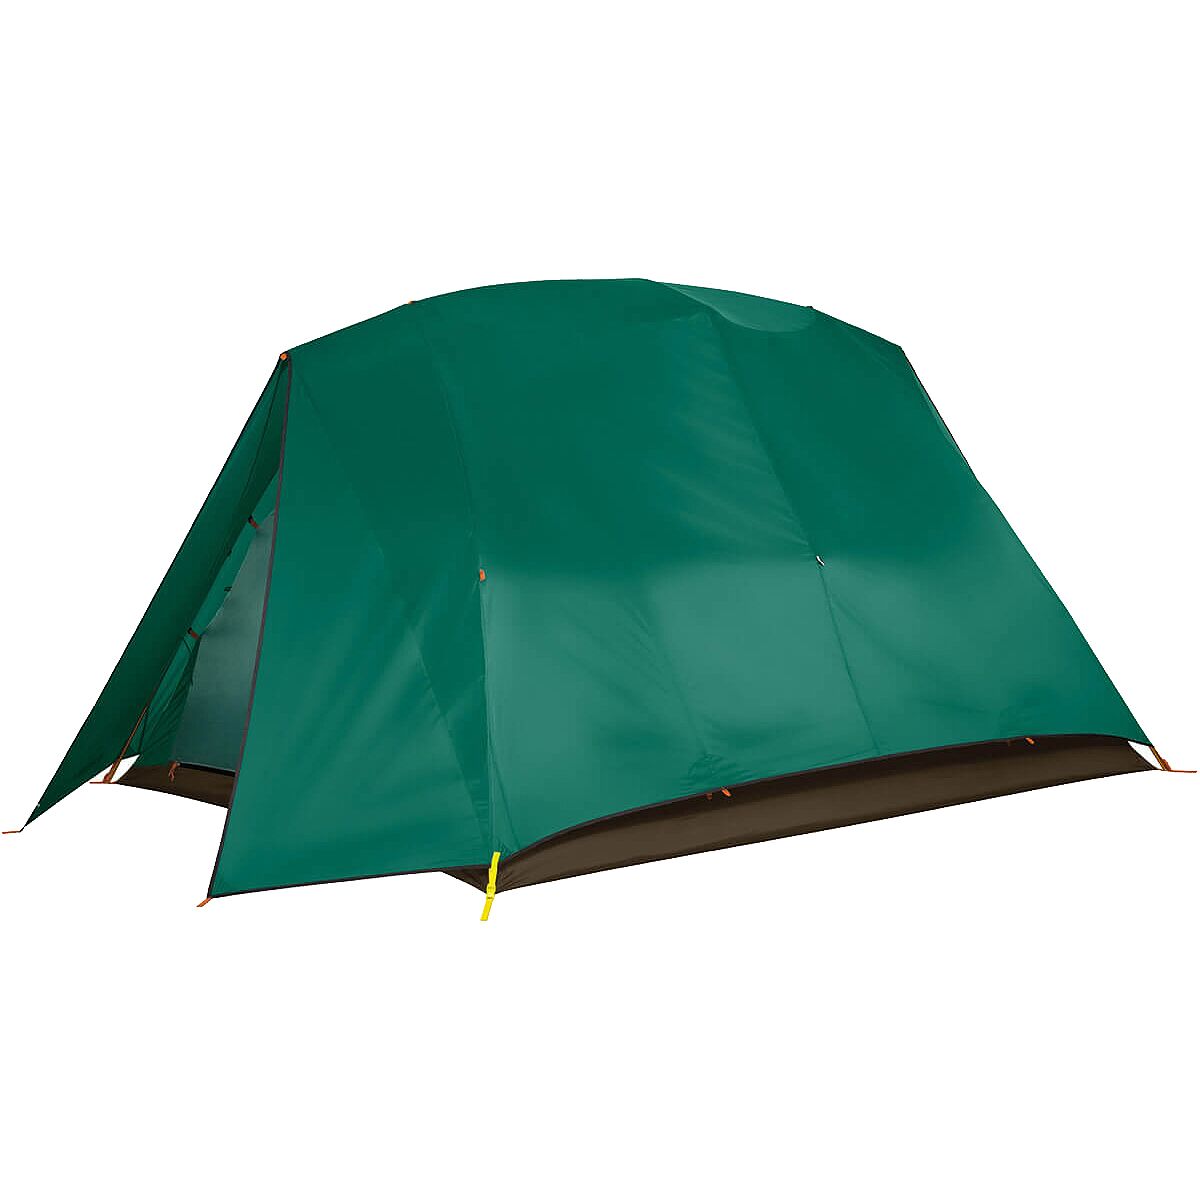 Eureka! Timberline SQ Outfitter 6 Tent: 6-Person 3-Season